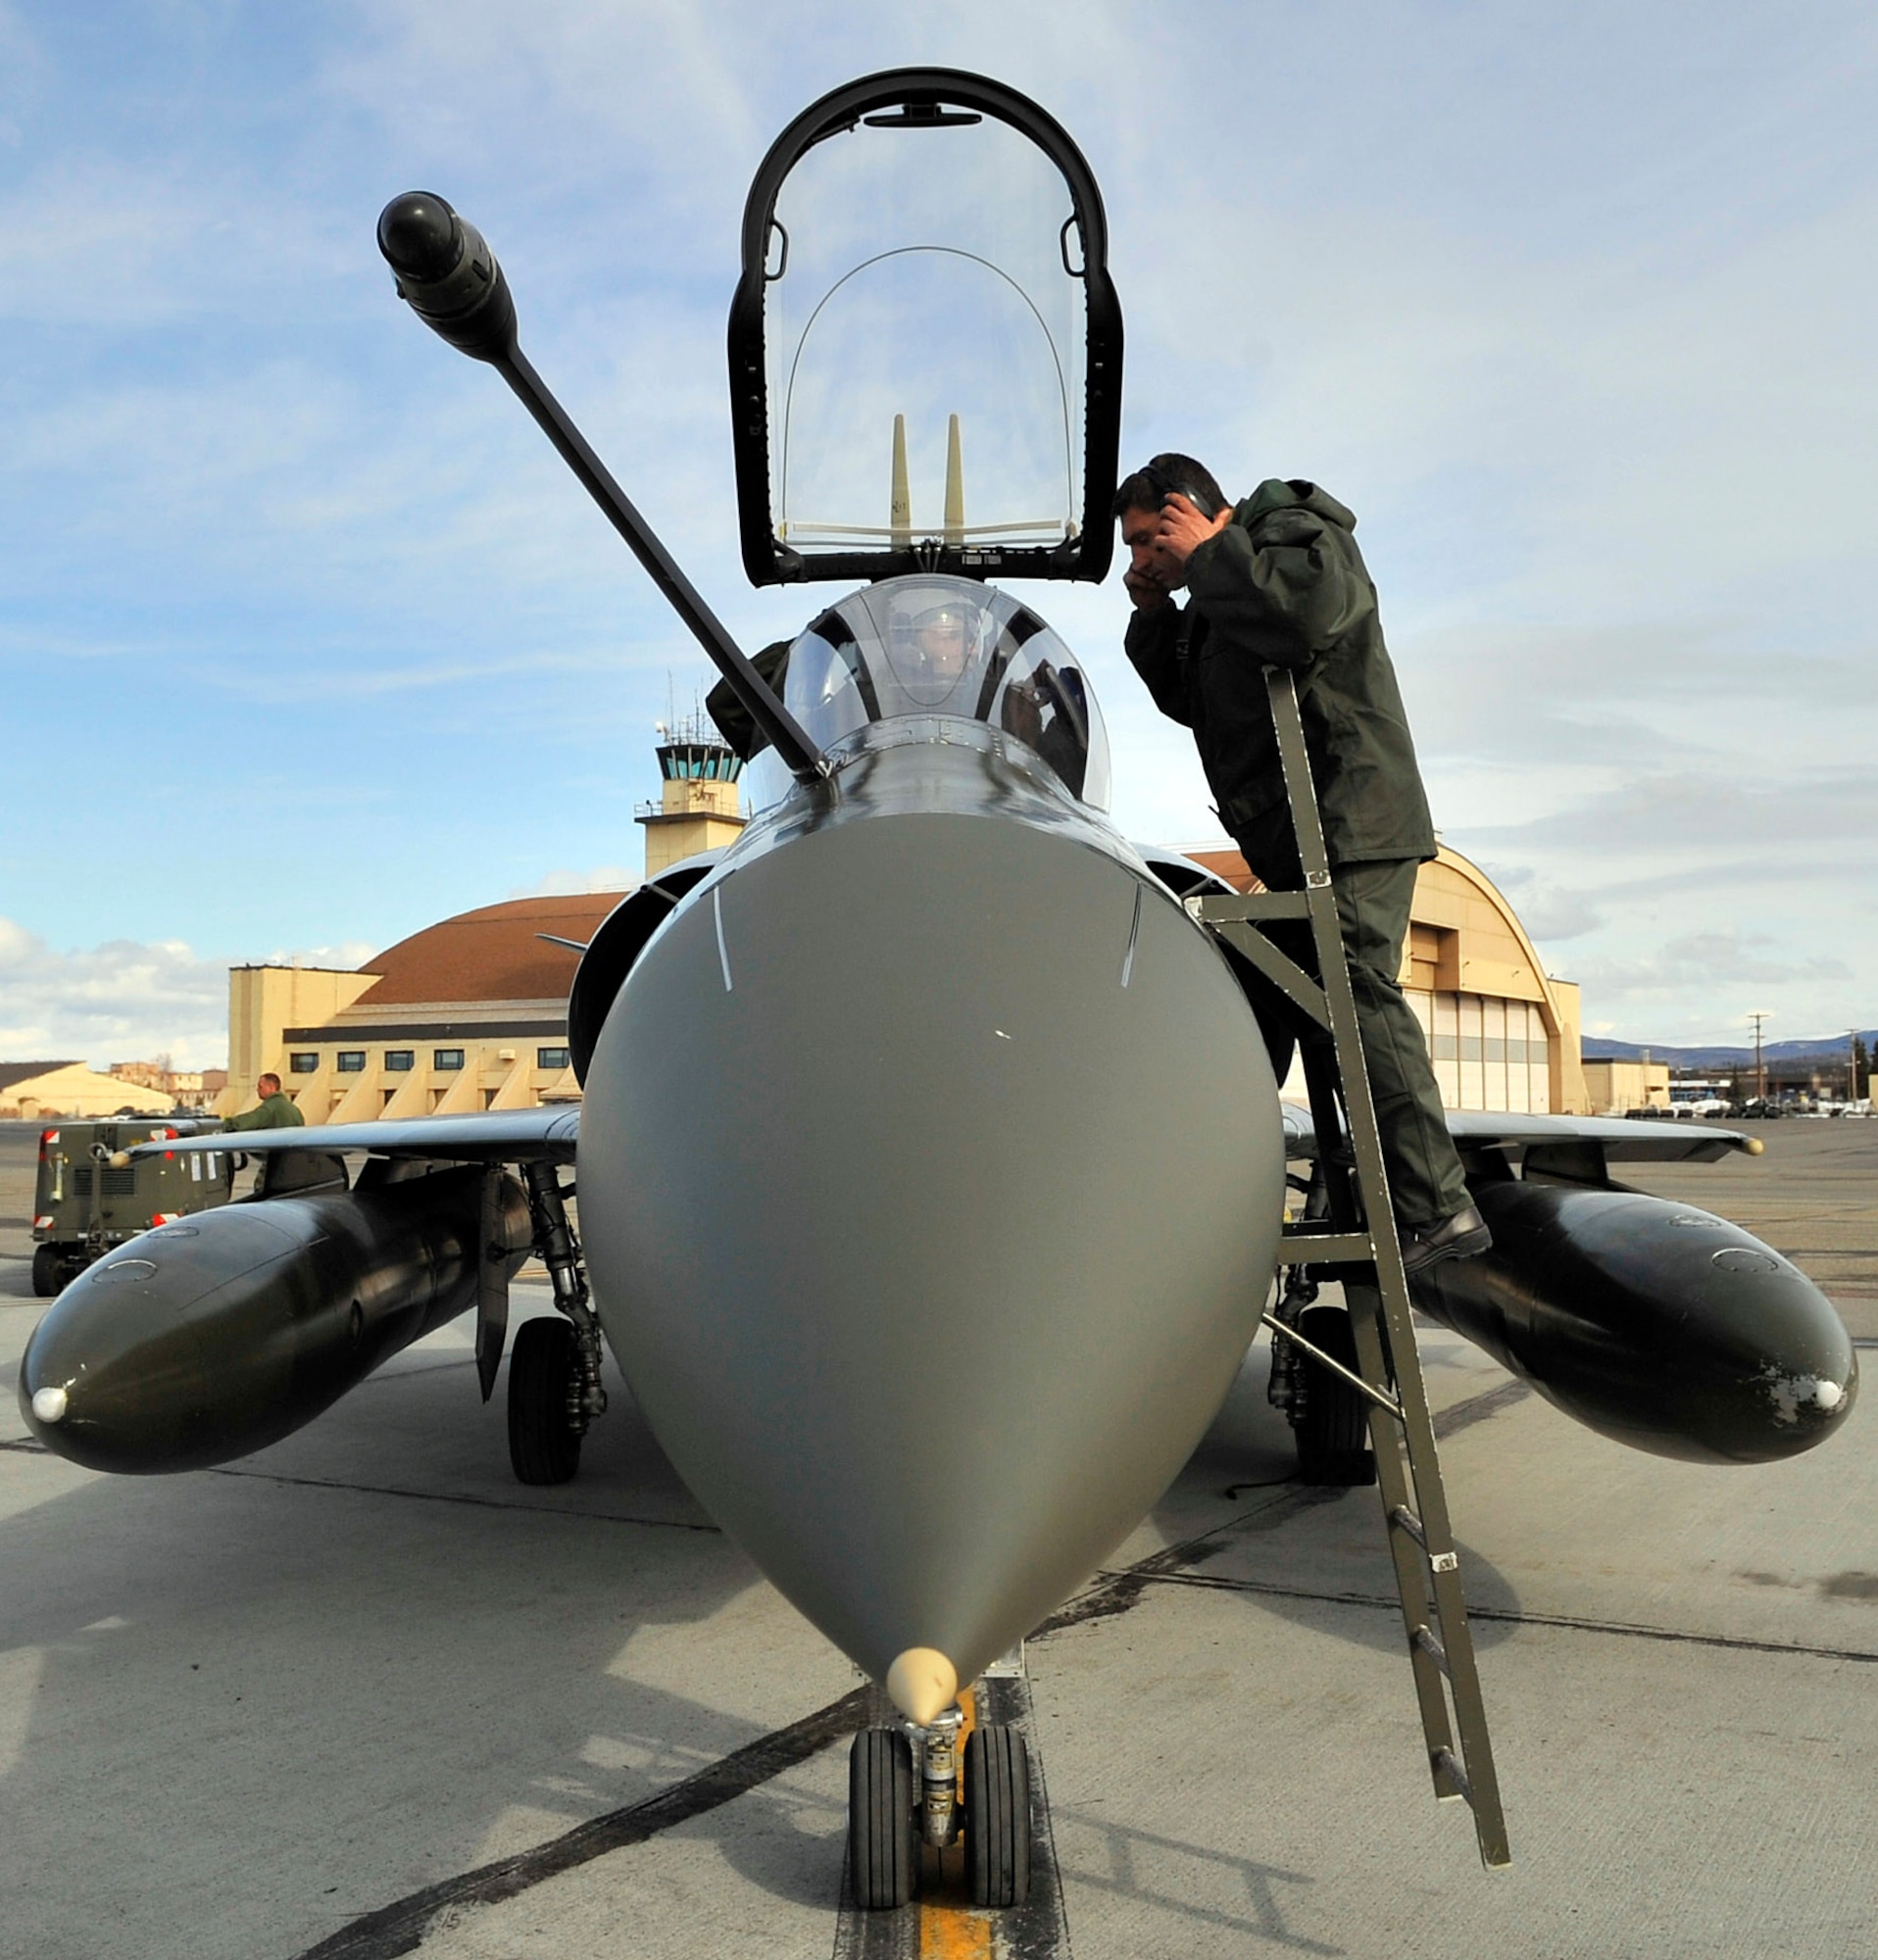 A crew chief from Luxeuil Air Base, France, speaks to a Mirage 2000 pilot April 14 at Eielson Air Force Base, Alaska. French air force personnel arrived at Eielson AFB to participate in Red-Flag Alaska, which provides unique opportunities to integrate various forces into joint, coalition, and bilateral training from simulated forward operating bases. (U.S. Air Force photo/Airman 1st Class Willard E. Grande II)